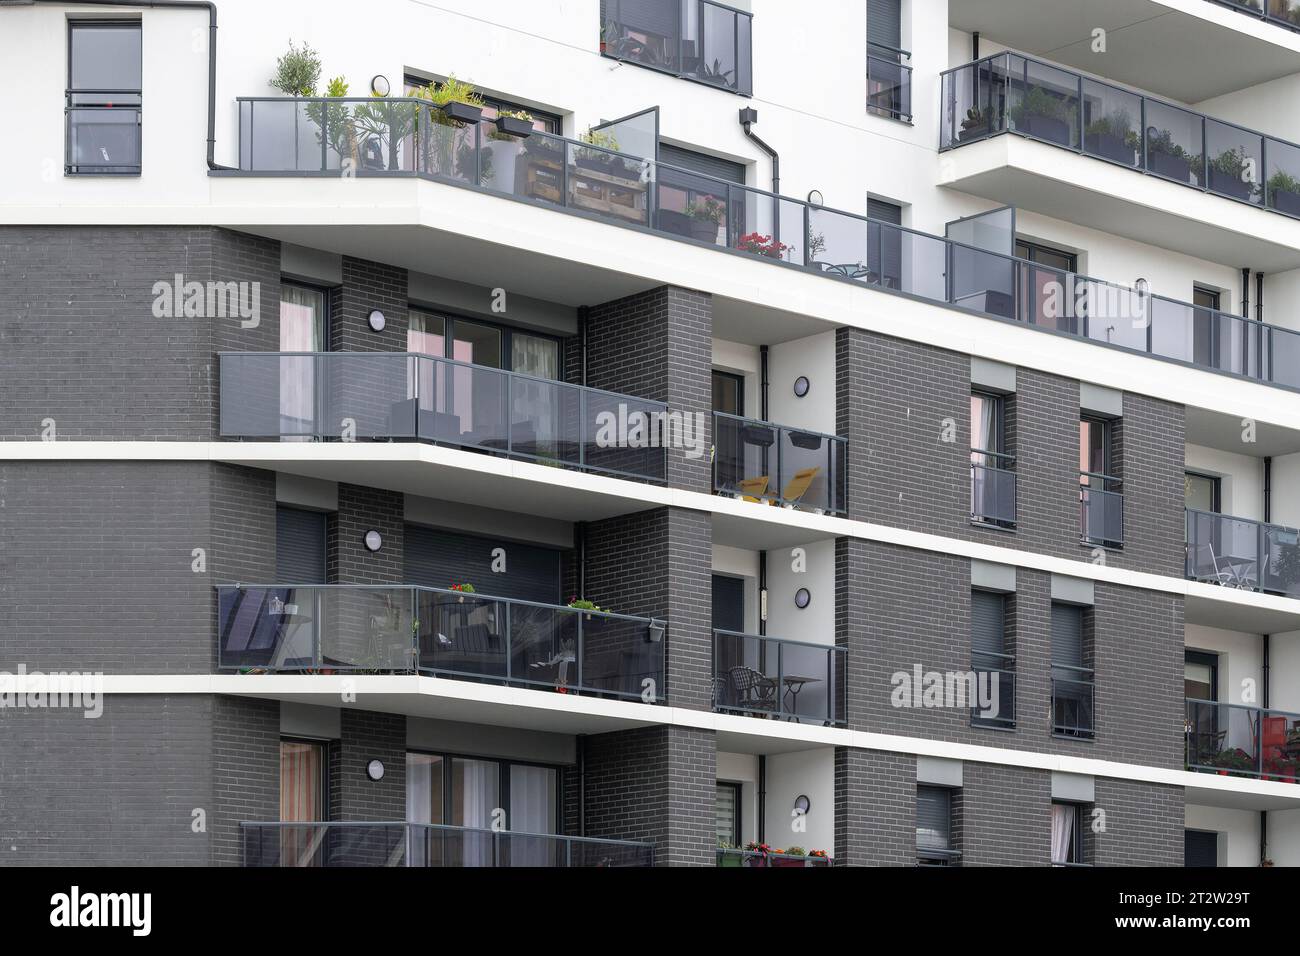 Le Havre, France - Focus on a part of a modern residential building with black bricks. Stock Photo